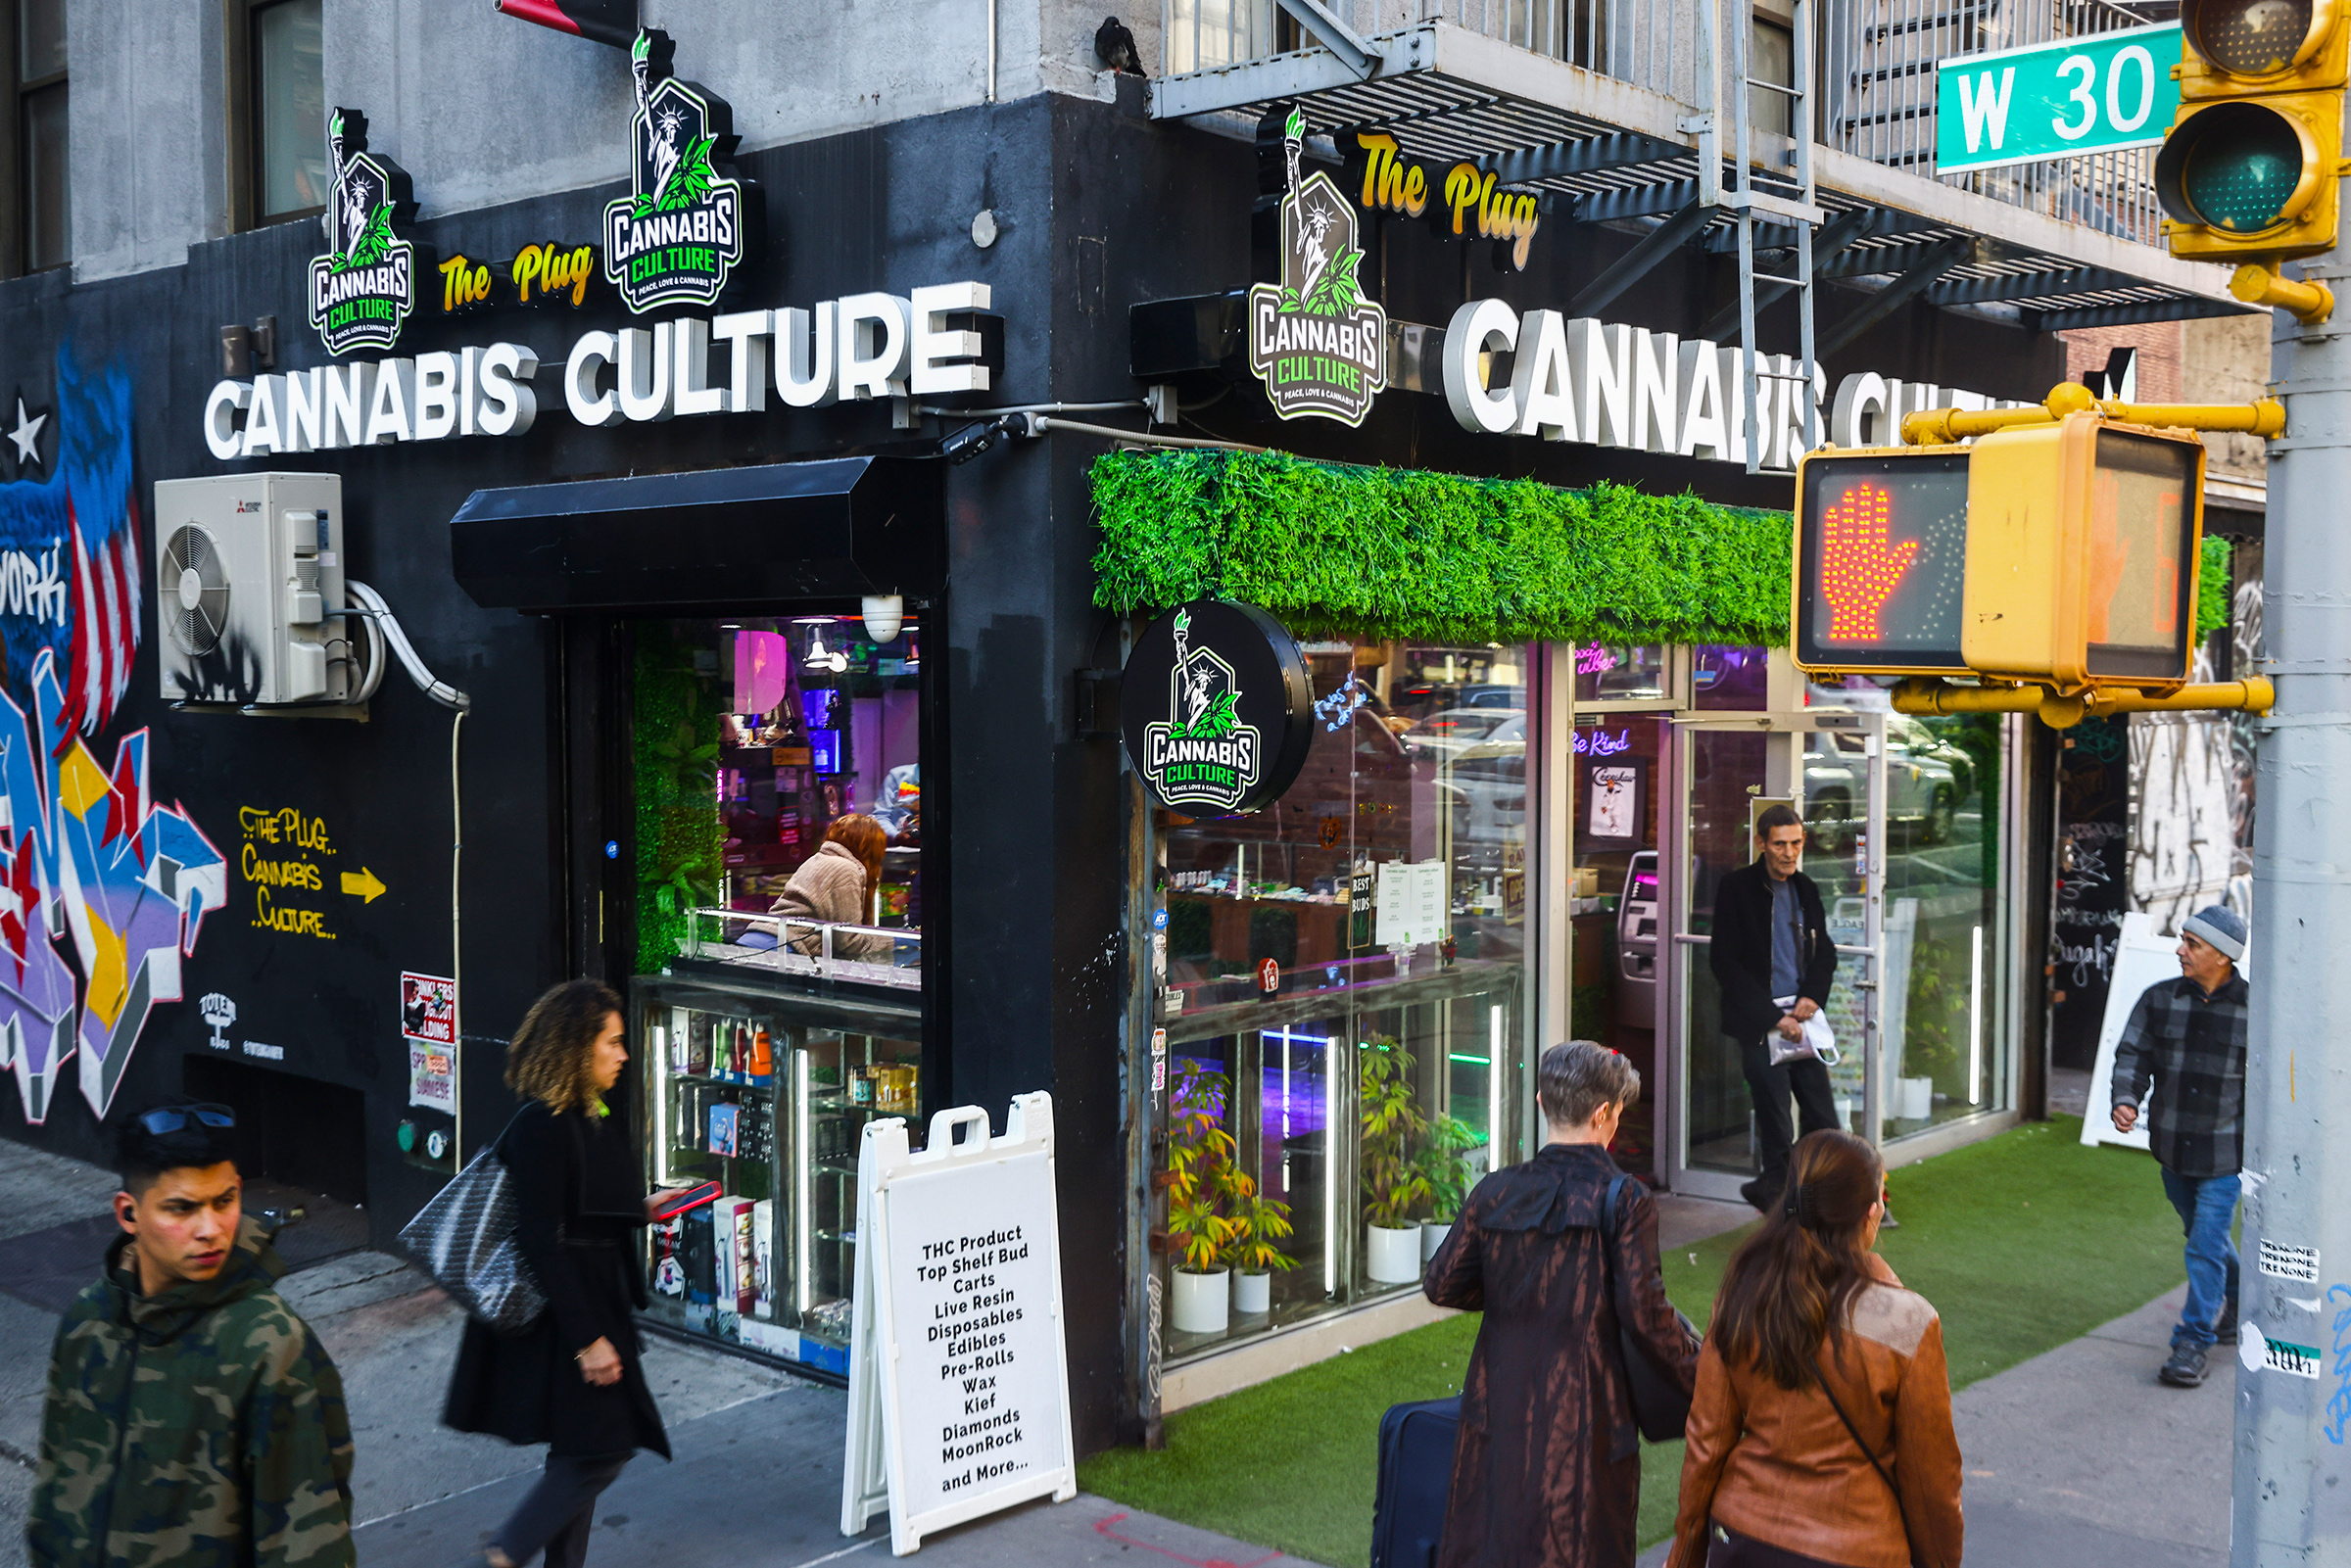 A Cannabis Culture store in New York City on Oct. 21. (Beata Zawrzel—NurPhoto/Getty Images)